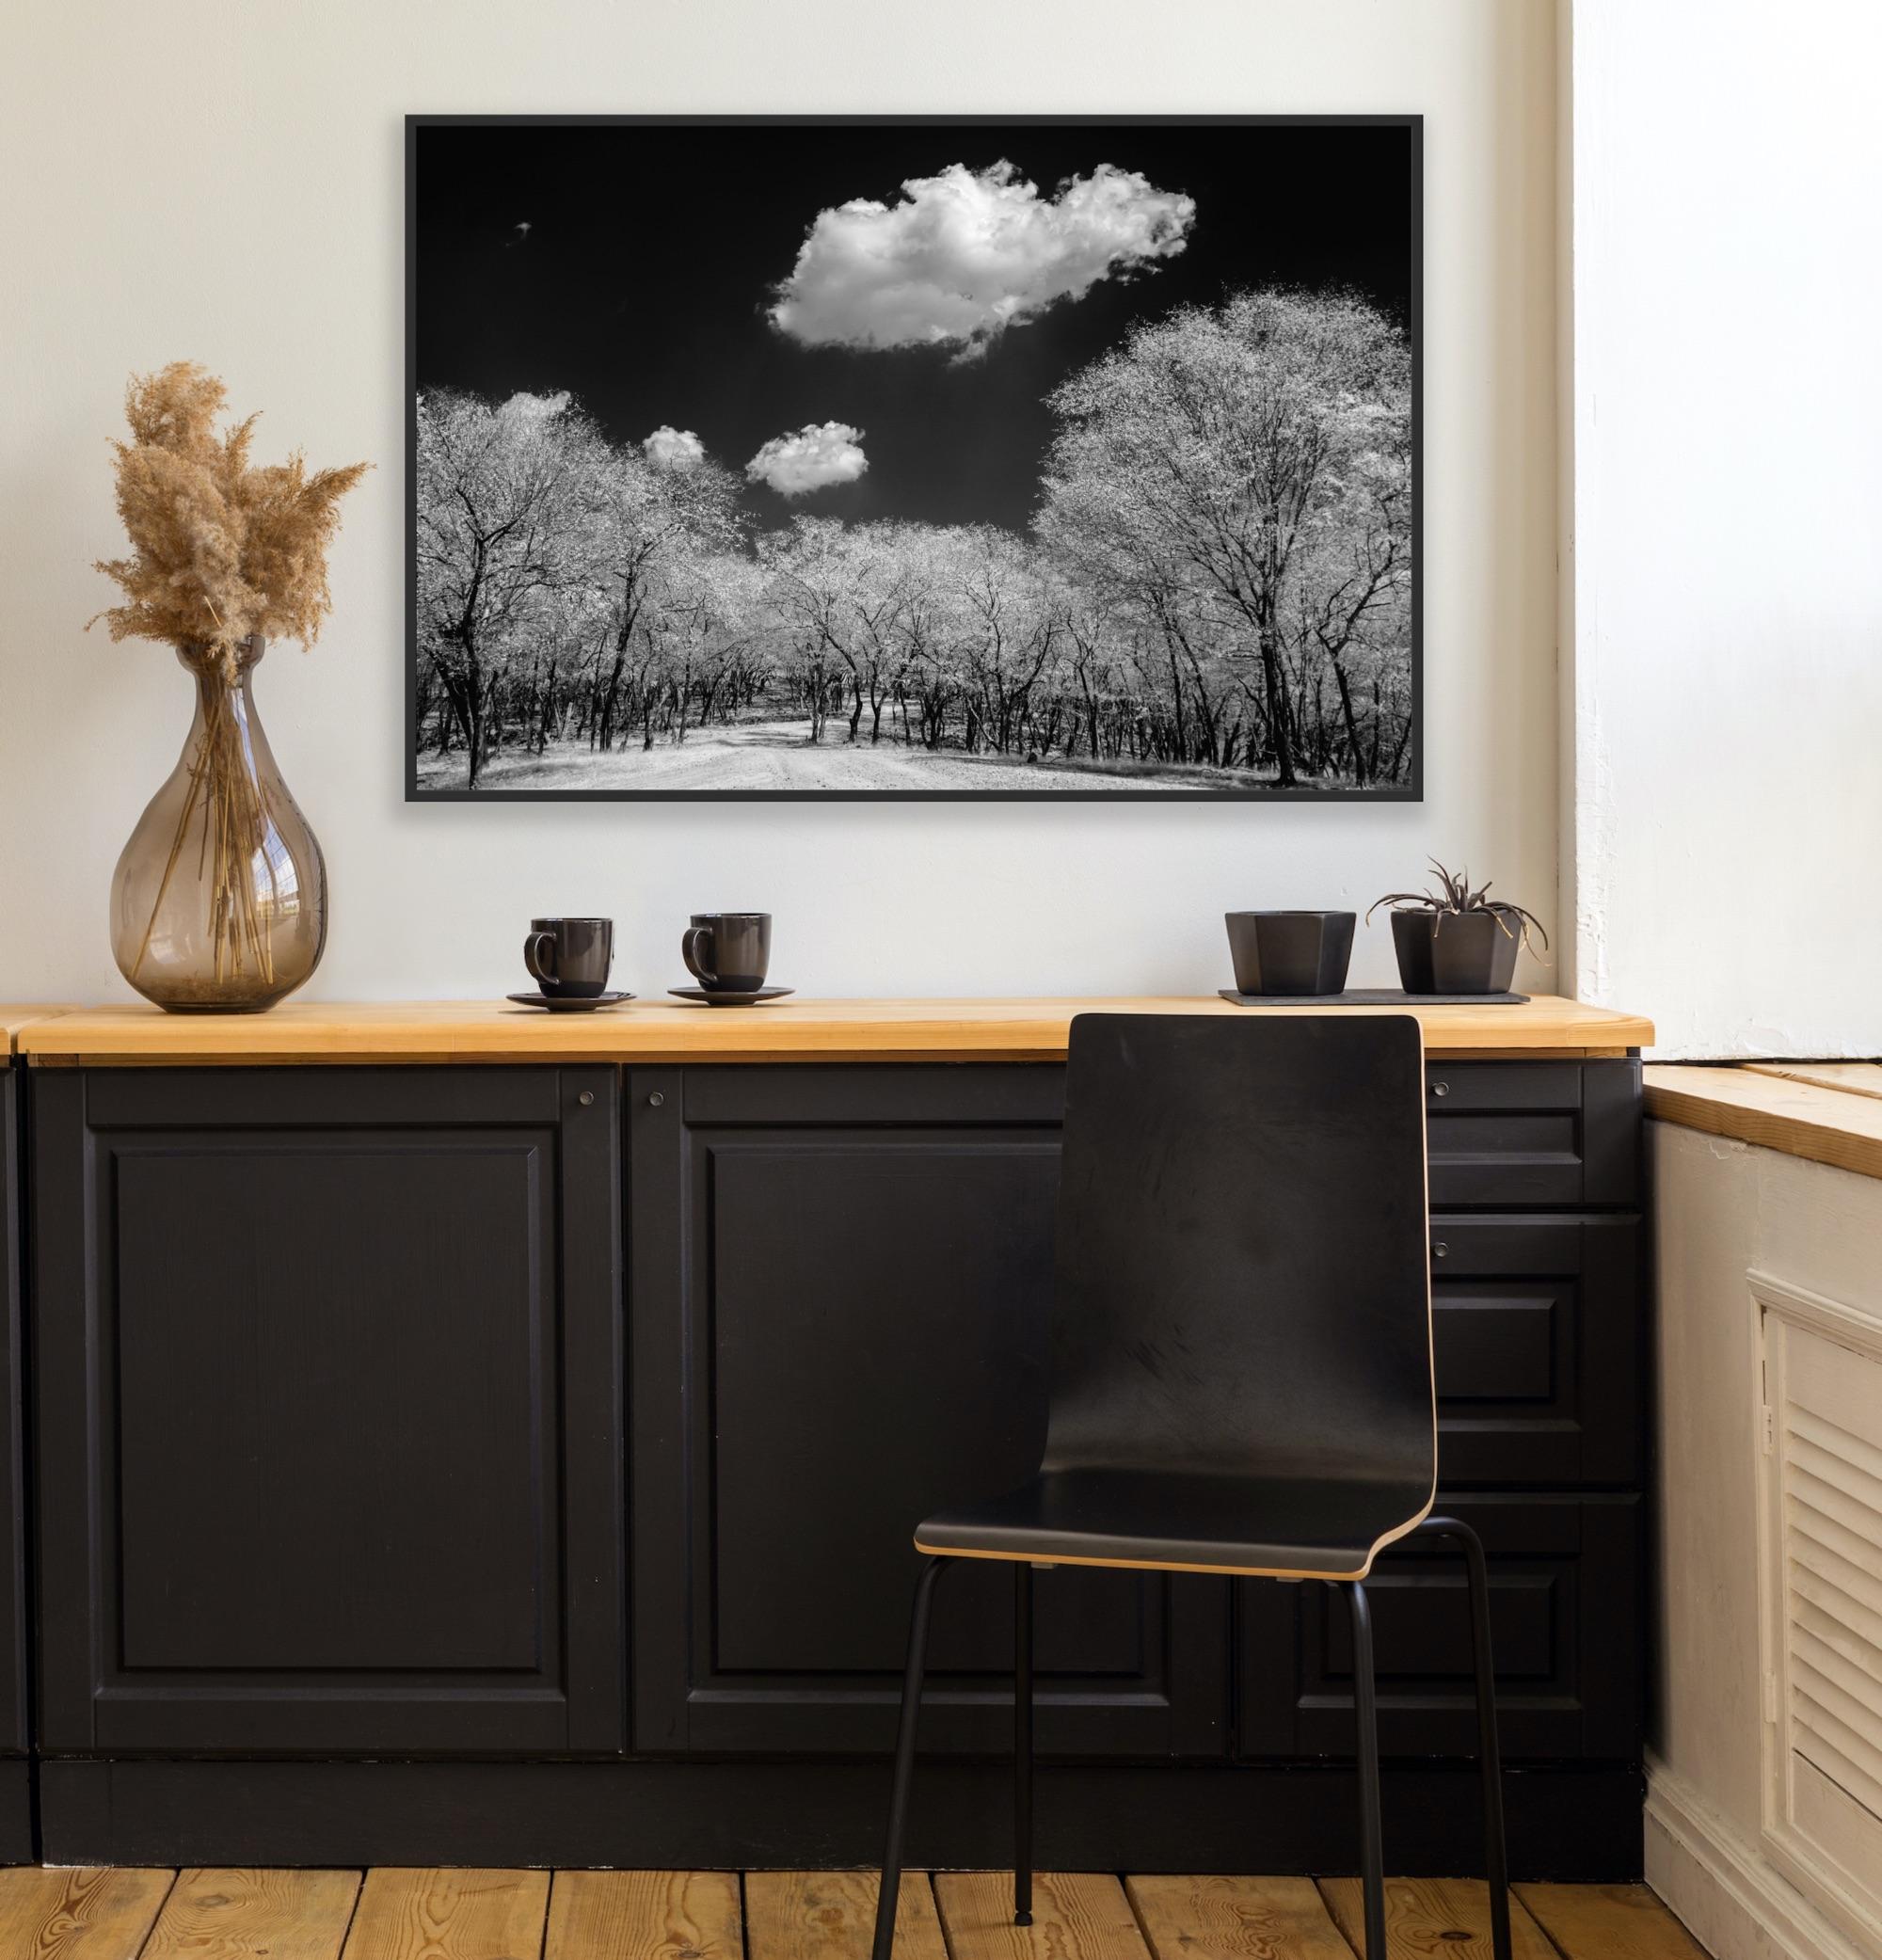 Surreal Black White Landscape Photograph Nature Wildlife India Trees Clouds For Sale 16